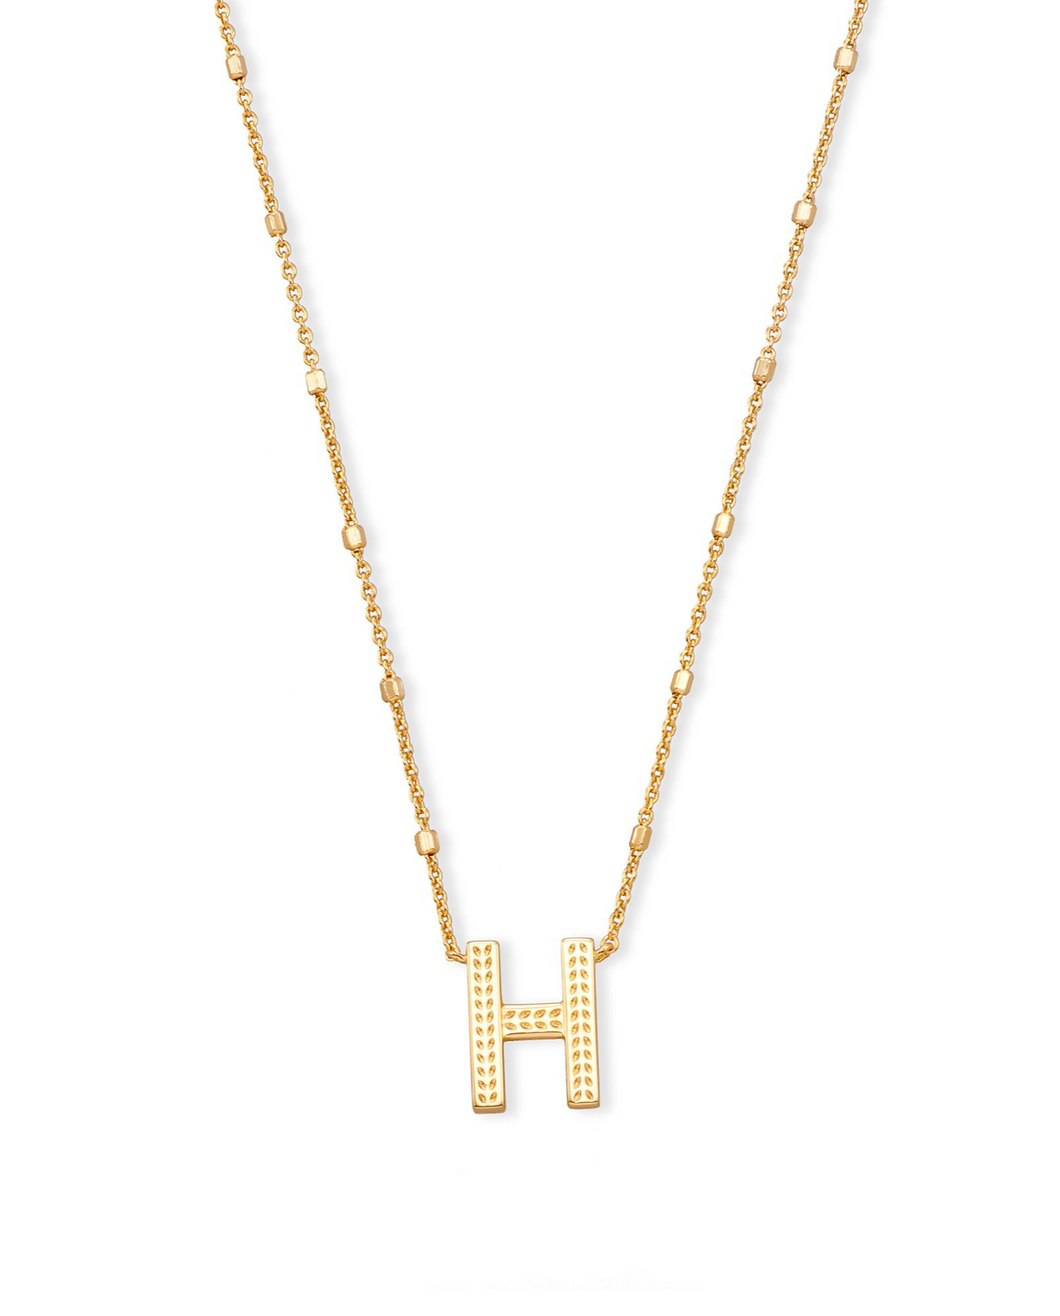 Letter H Pendant Necklace in Gold by Kendra Scott